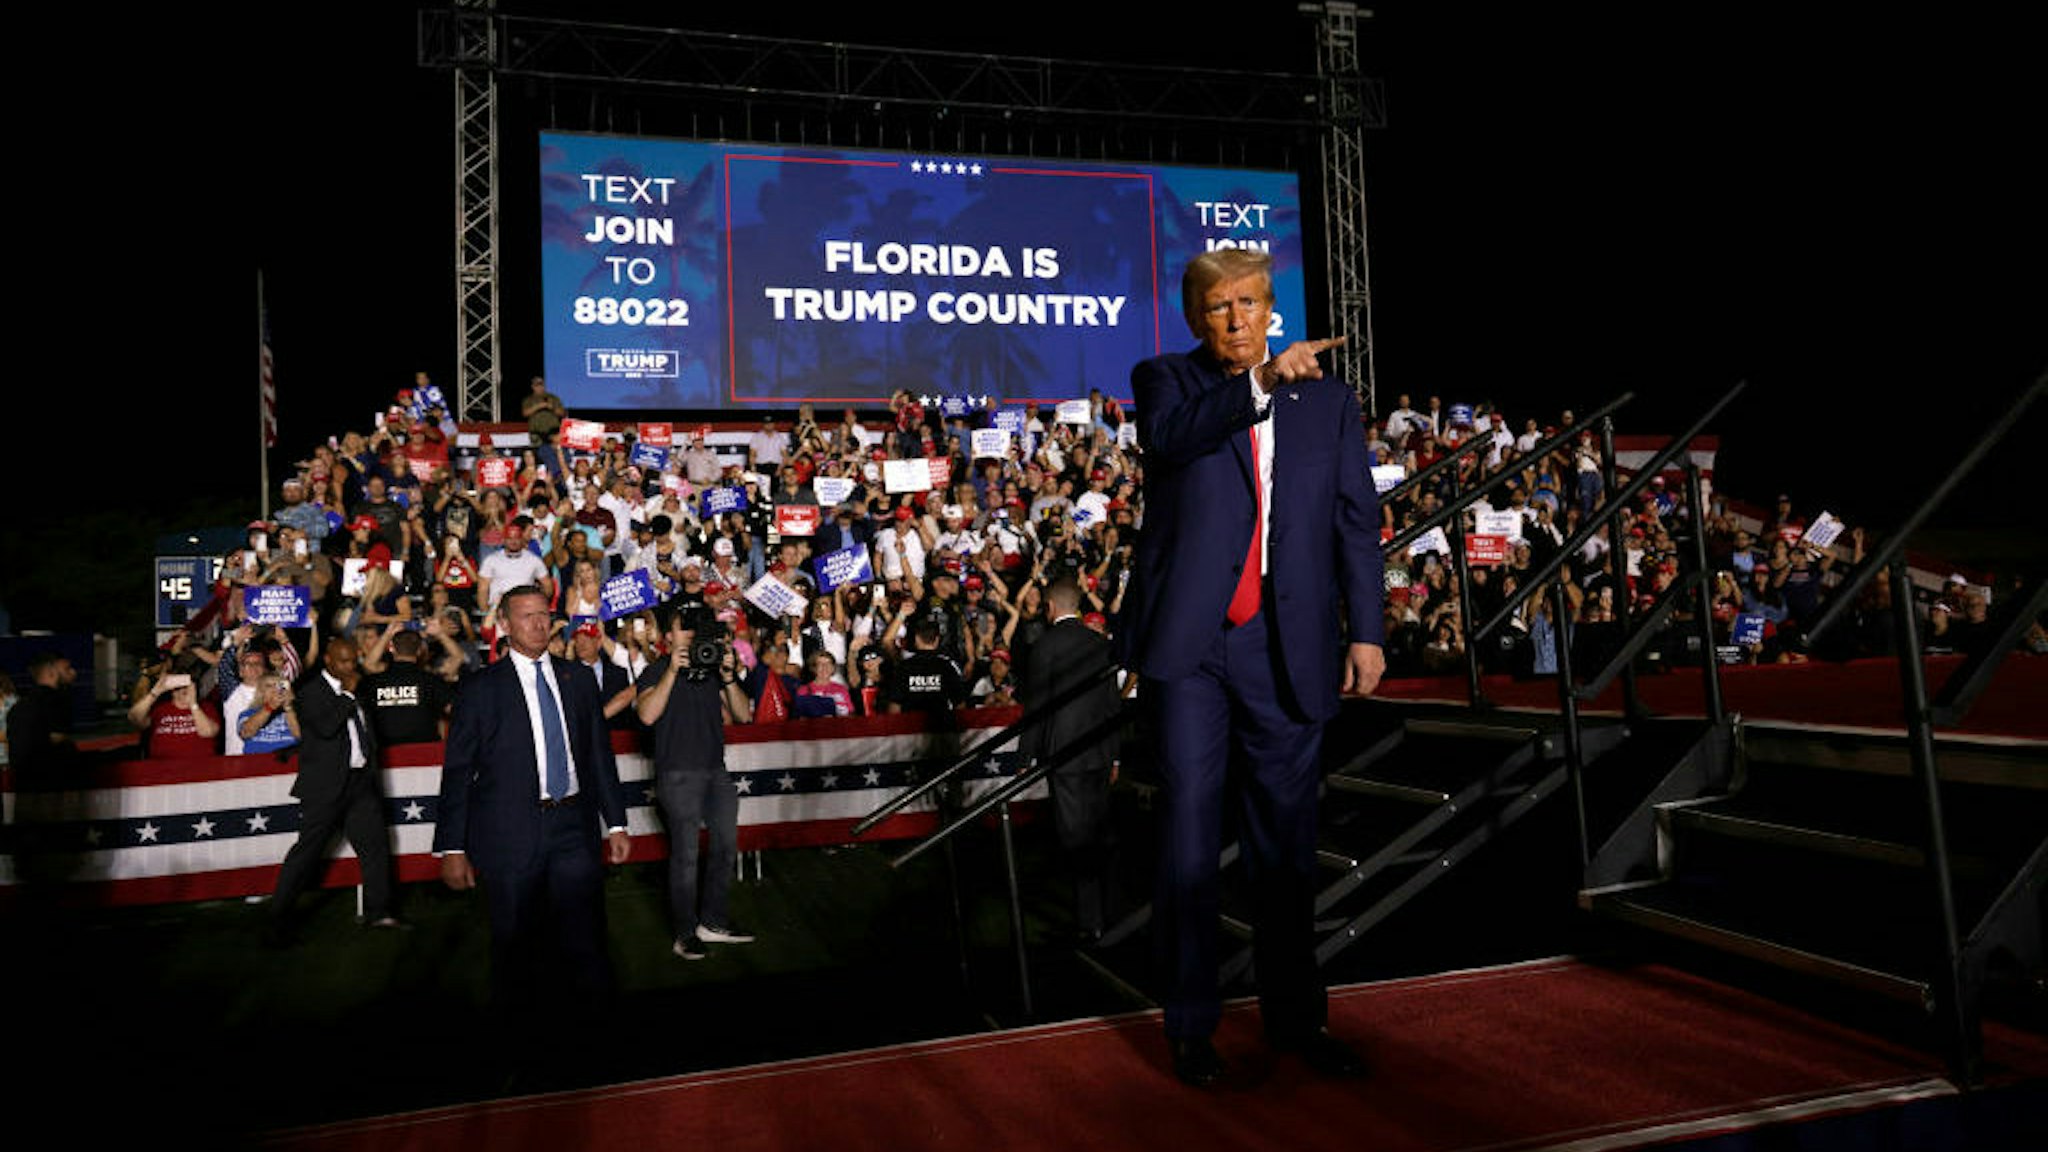 HIALEAH, FL - NOVEMBER 8: Former U.S. President Donald Trump delivers remarks at The Ted Hendricks Stadium at Henry Milander Park on November 8, 2023 in Hialeah, Florida. Even as Trump faces multiple criminal indictments, he still maintains a commanding lead in the polls over other Republican candidates. (Photo by Alon Skuy/Getty Images)